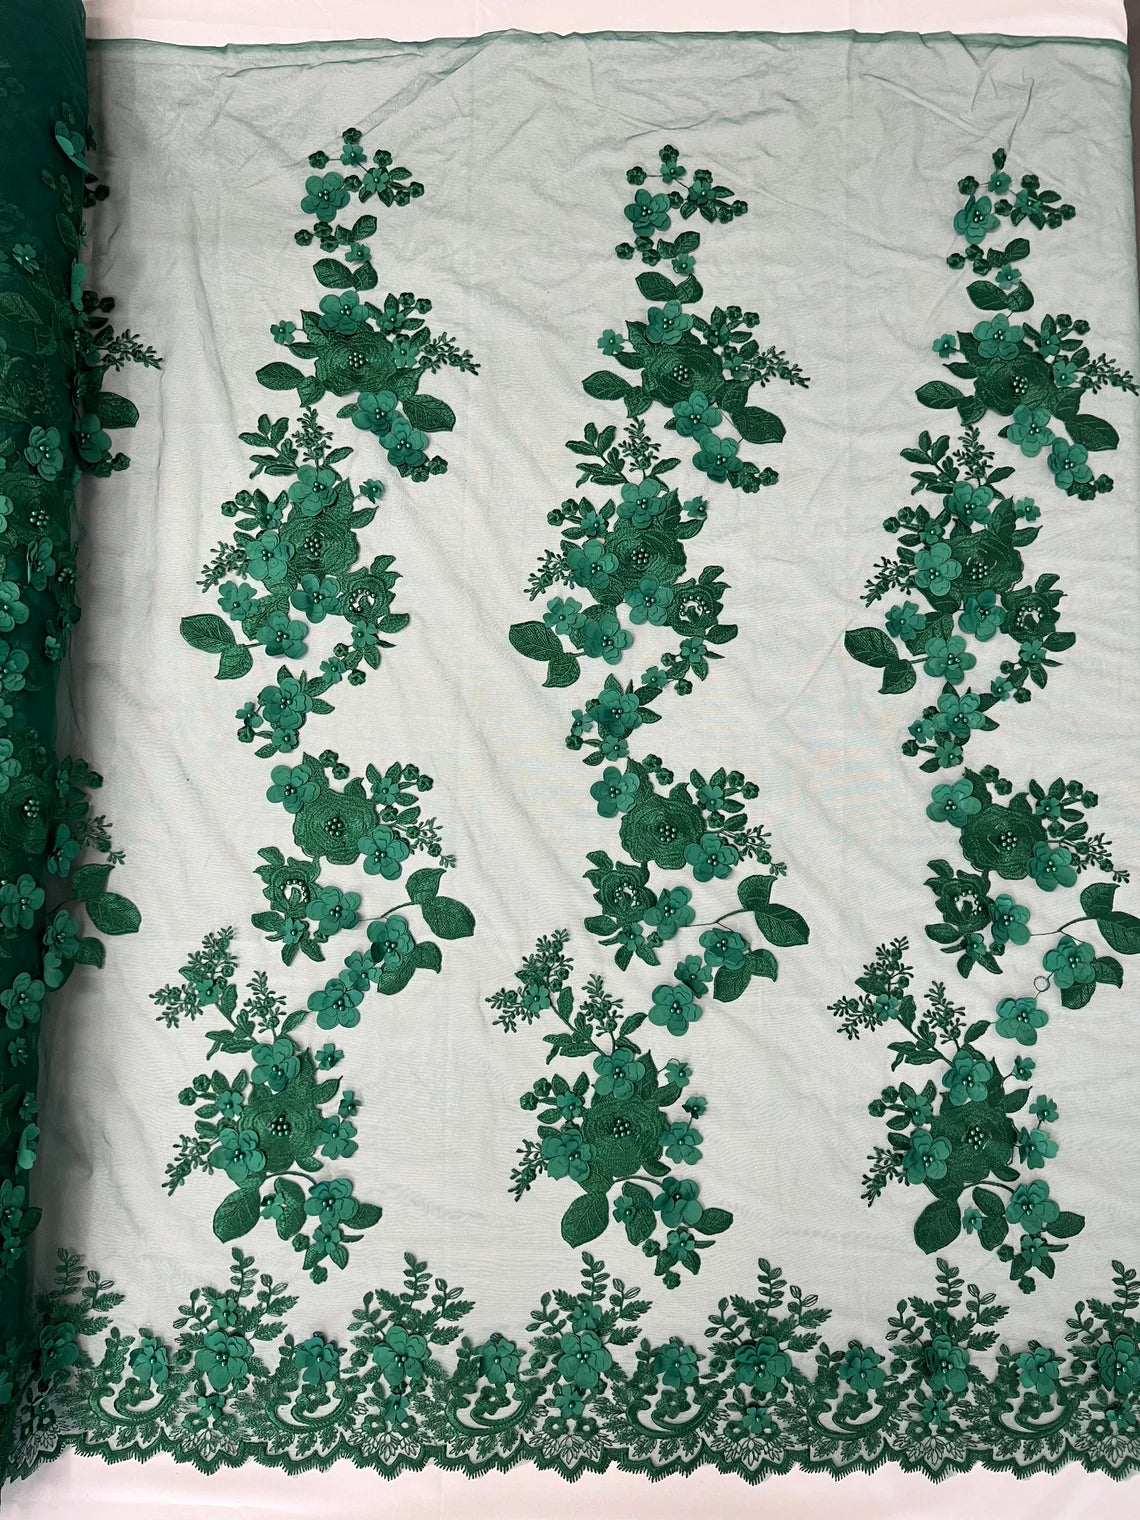 3D Flower Panels Fabric - Hunter Green - Flower Panels Bead Embroidered on Lace Fabric Sold By Yard